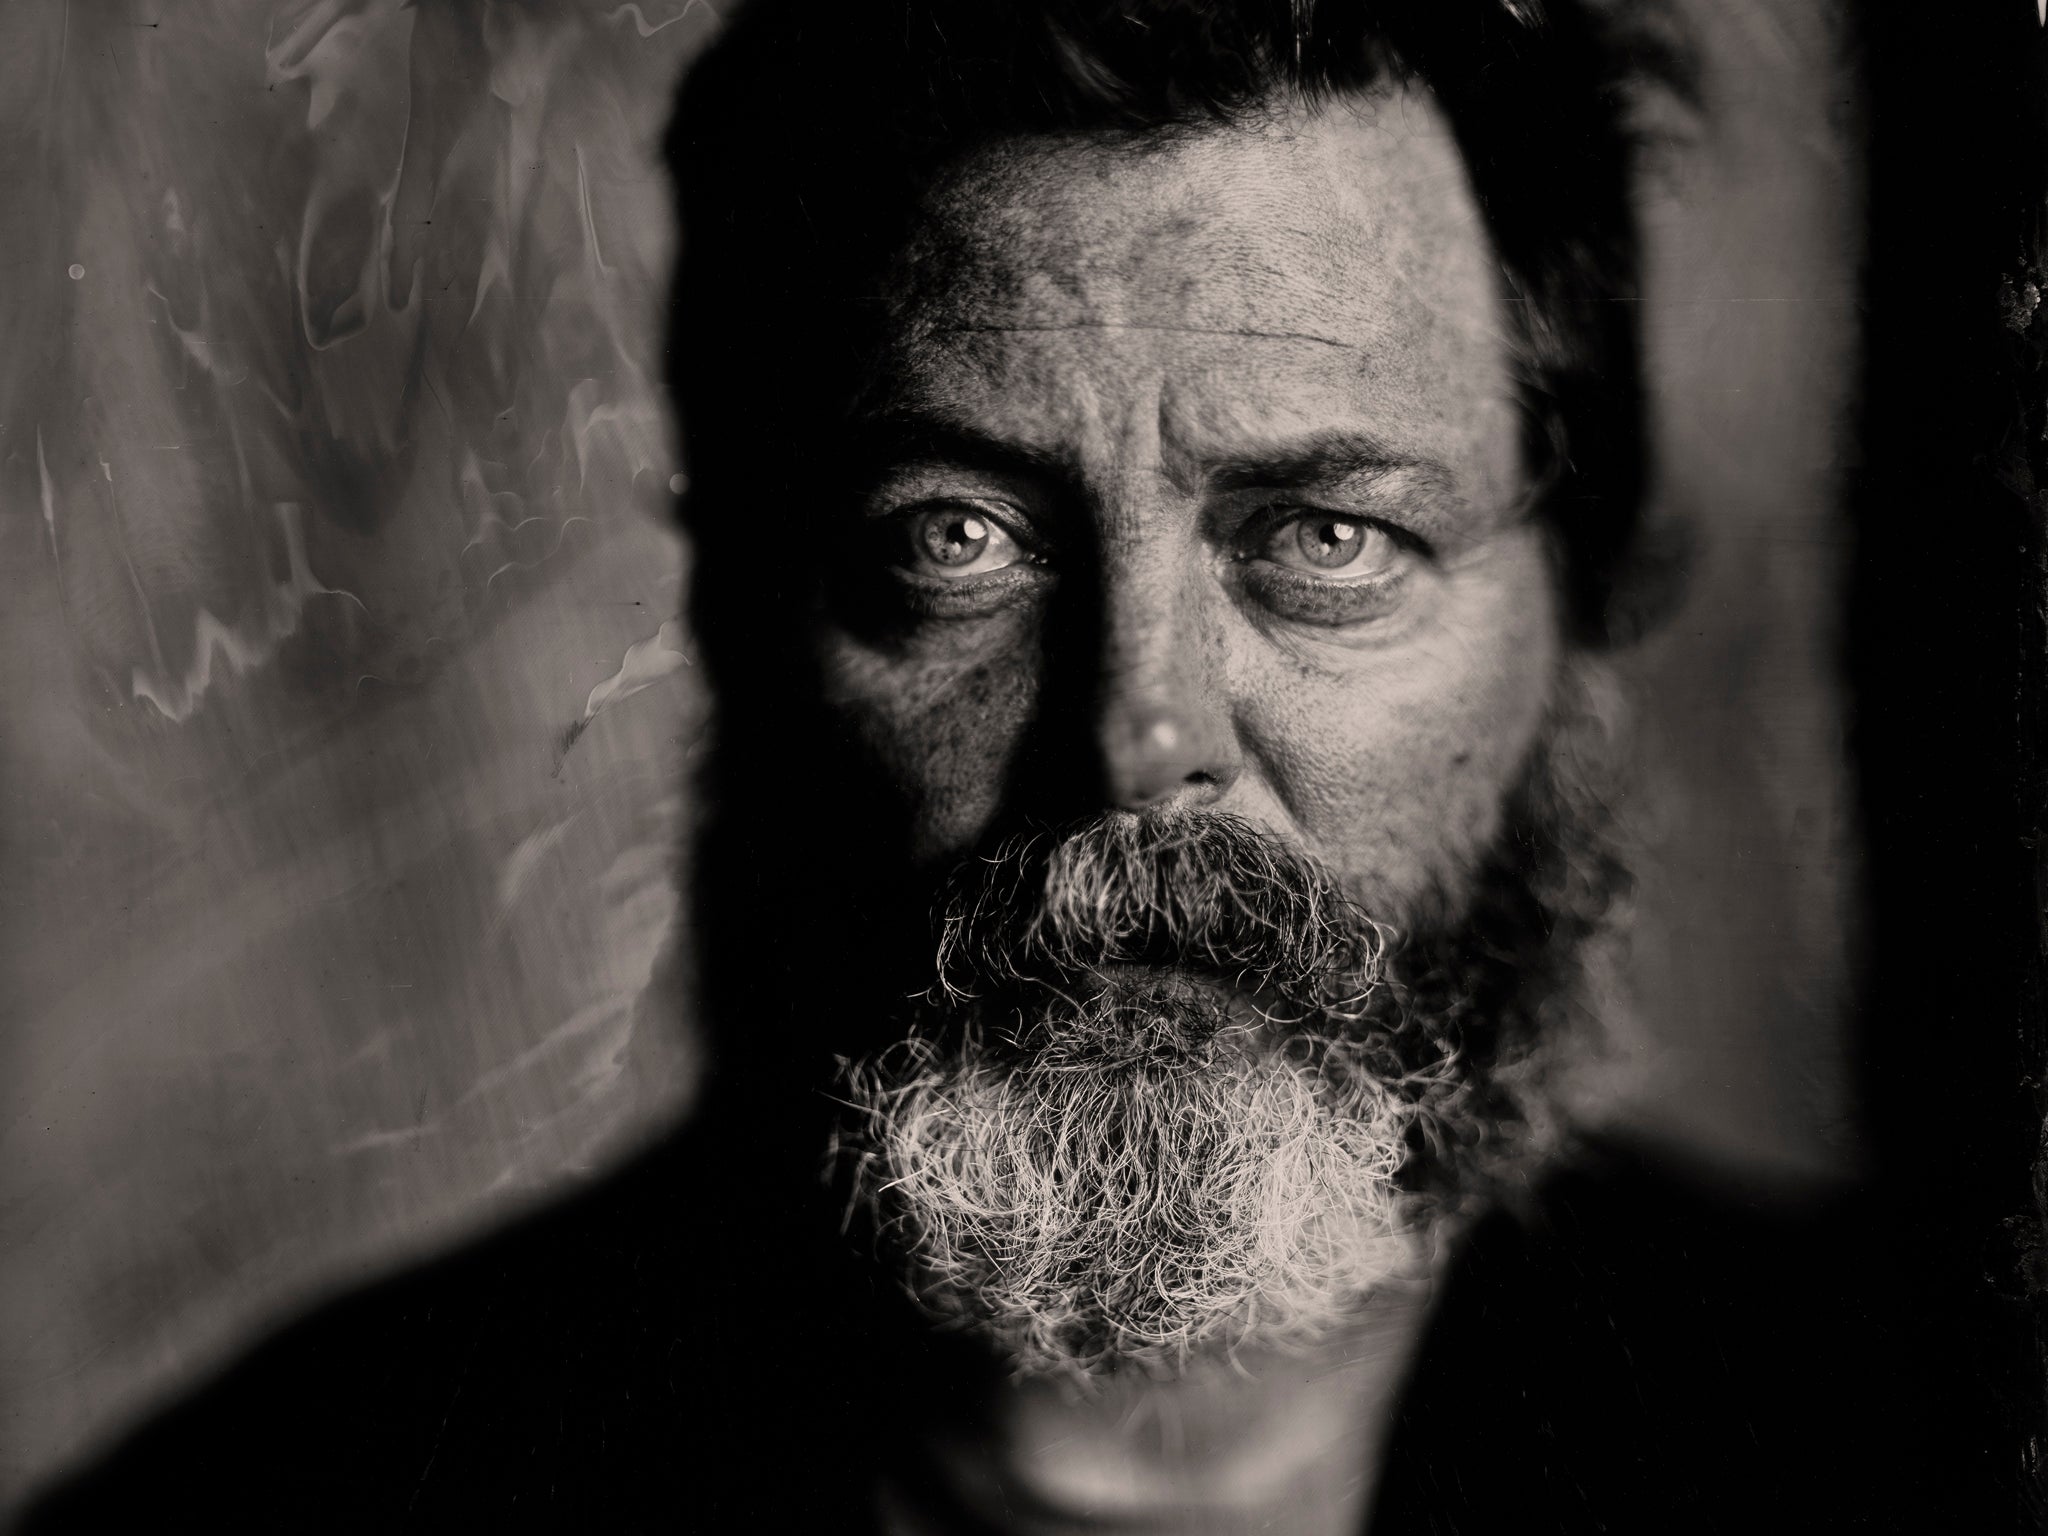 ‘It took me years to understand that my experiences in life were just as valuable as anybody else’s:’ Nick Offerman reflects on ‘Parks and Rec’ and his new Netflix series ‘Colin in Black and White’